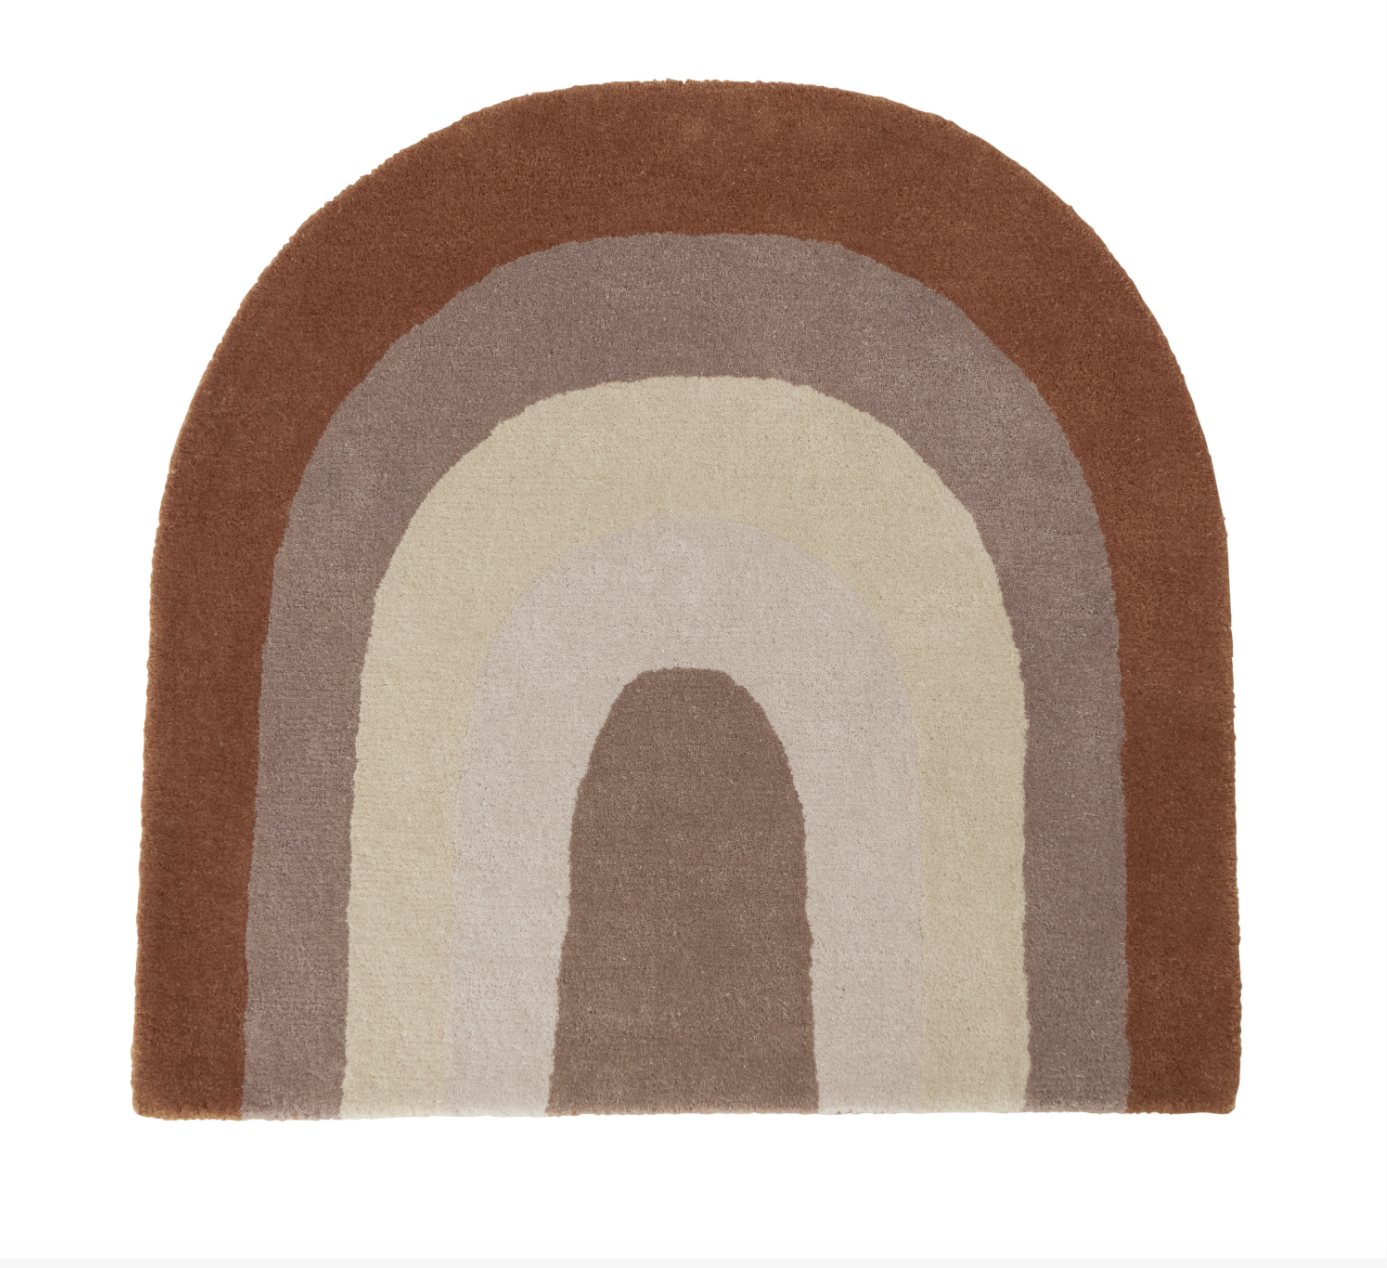 The Rainbow Rug Choco - 80% wool & 20% cotton, made in India